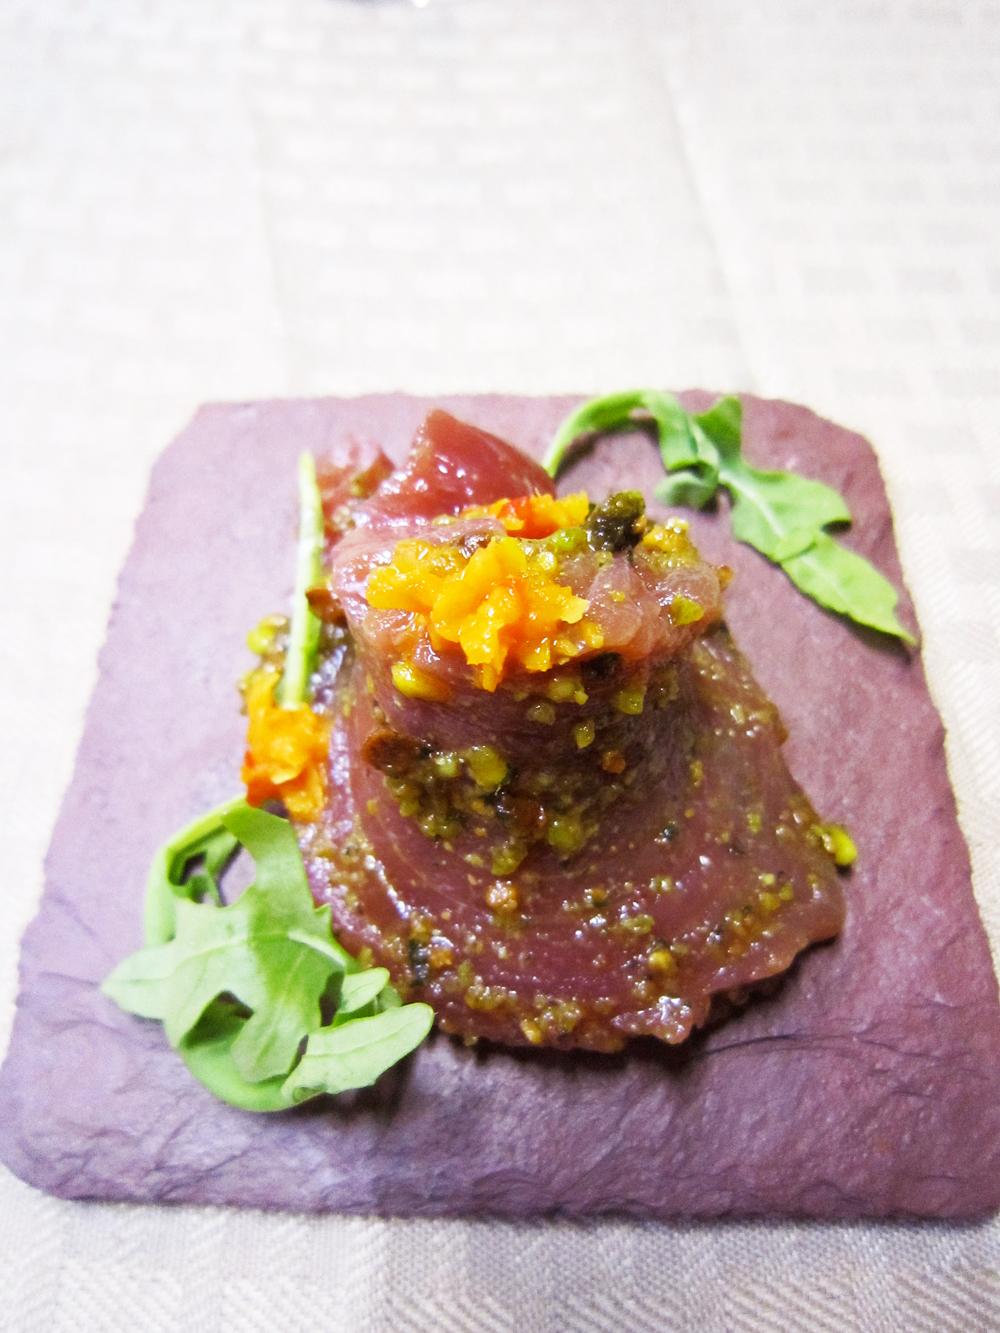 This tuna loin with mint and pistachio pesto and citrus zest fermented with chiles was a course at the kosher pop-up. Photo: Alix Wall